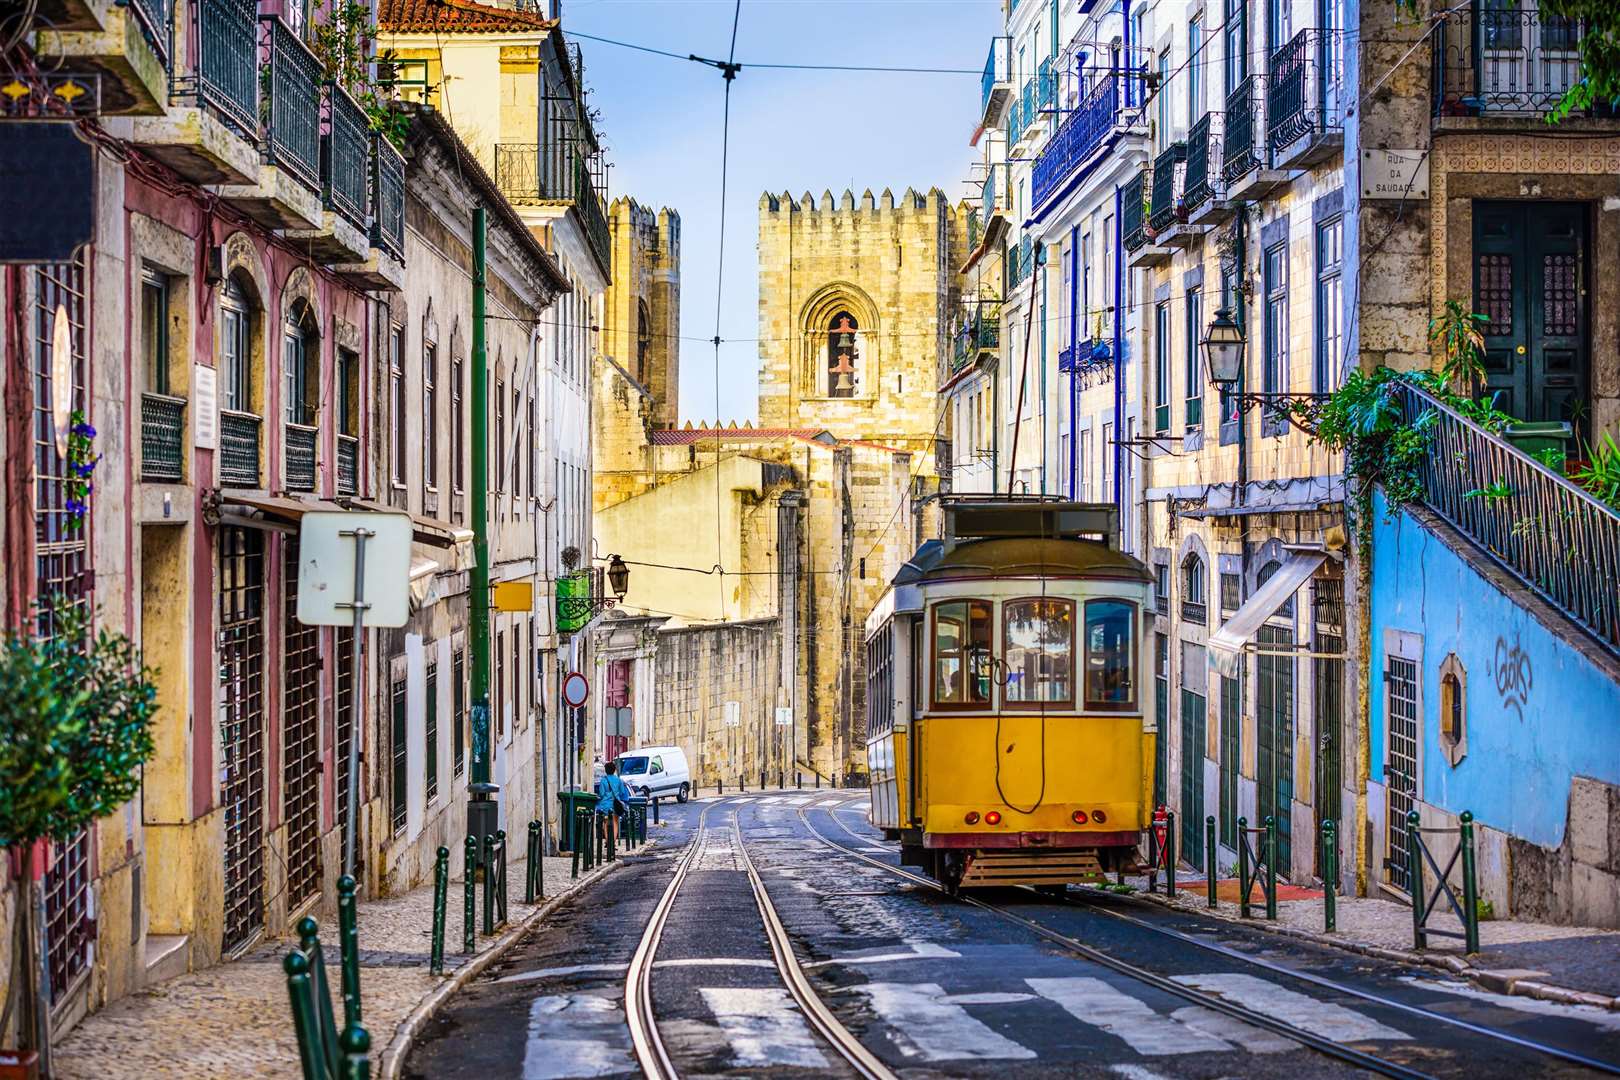 The famous trams of historic city Lisbon. Picture: PA Photo/Alamy.